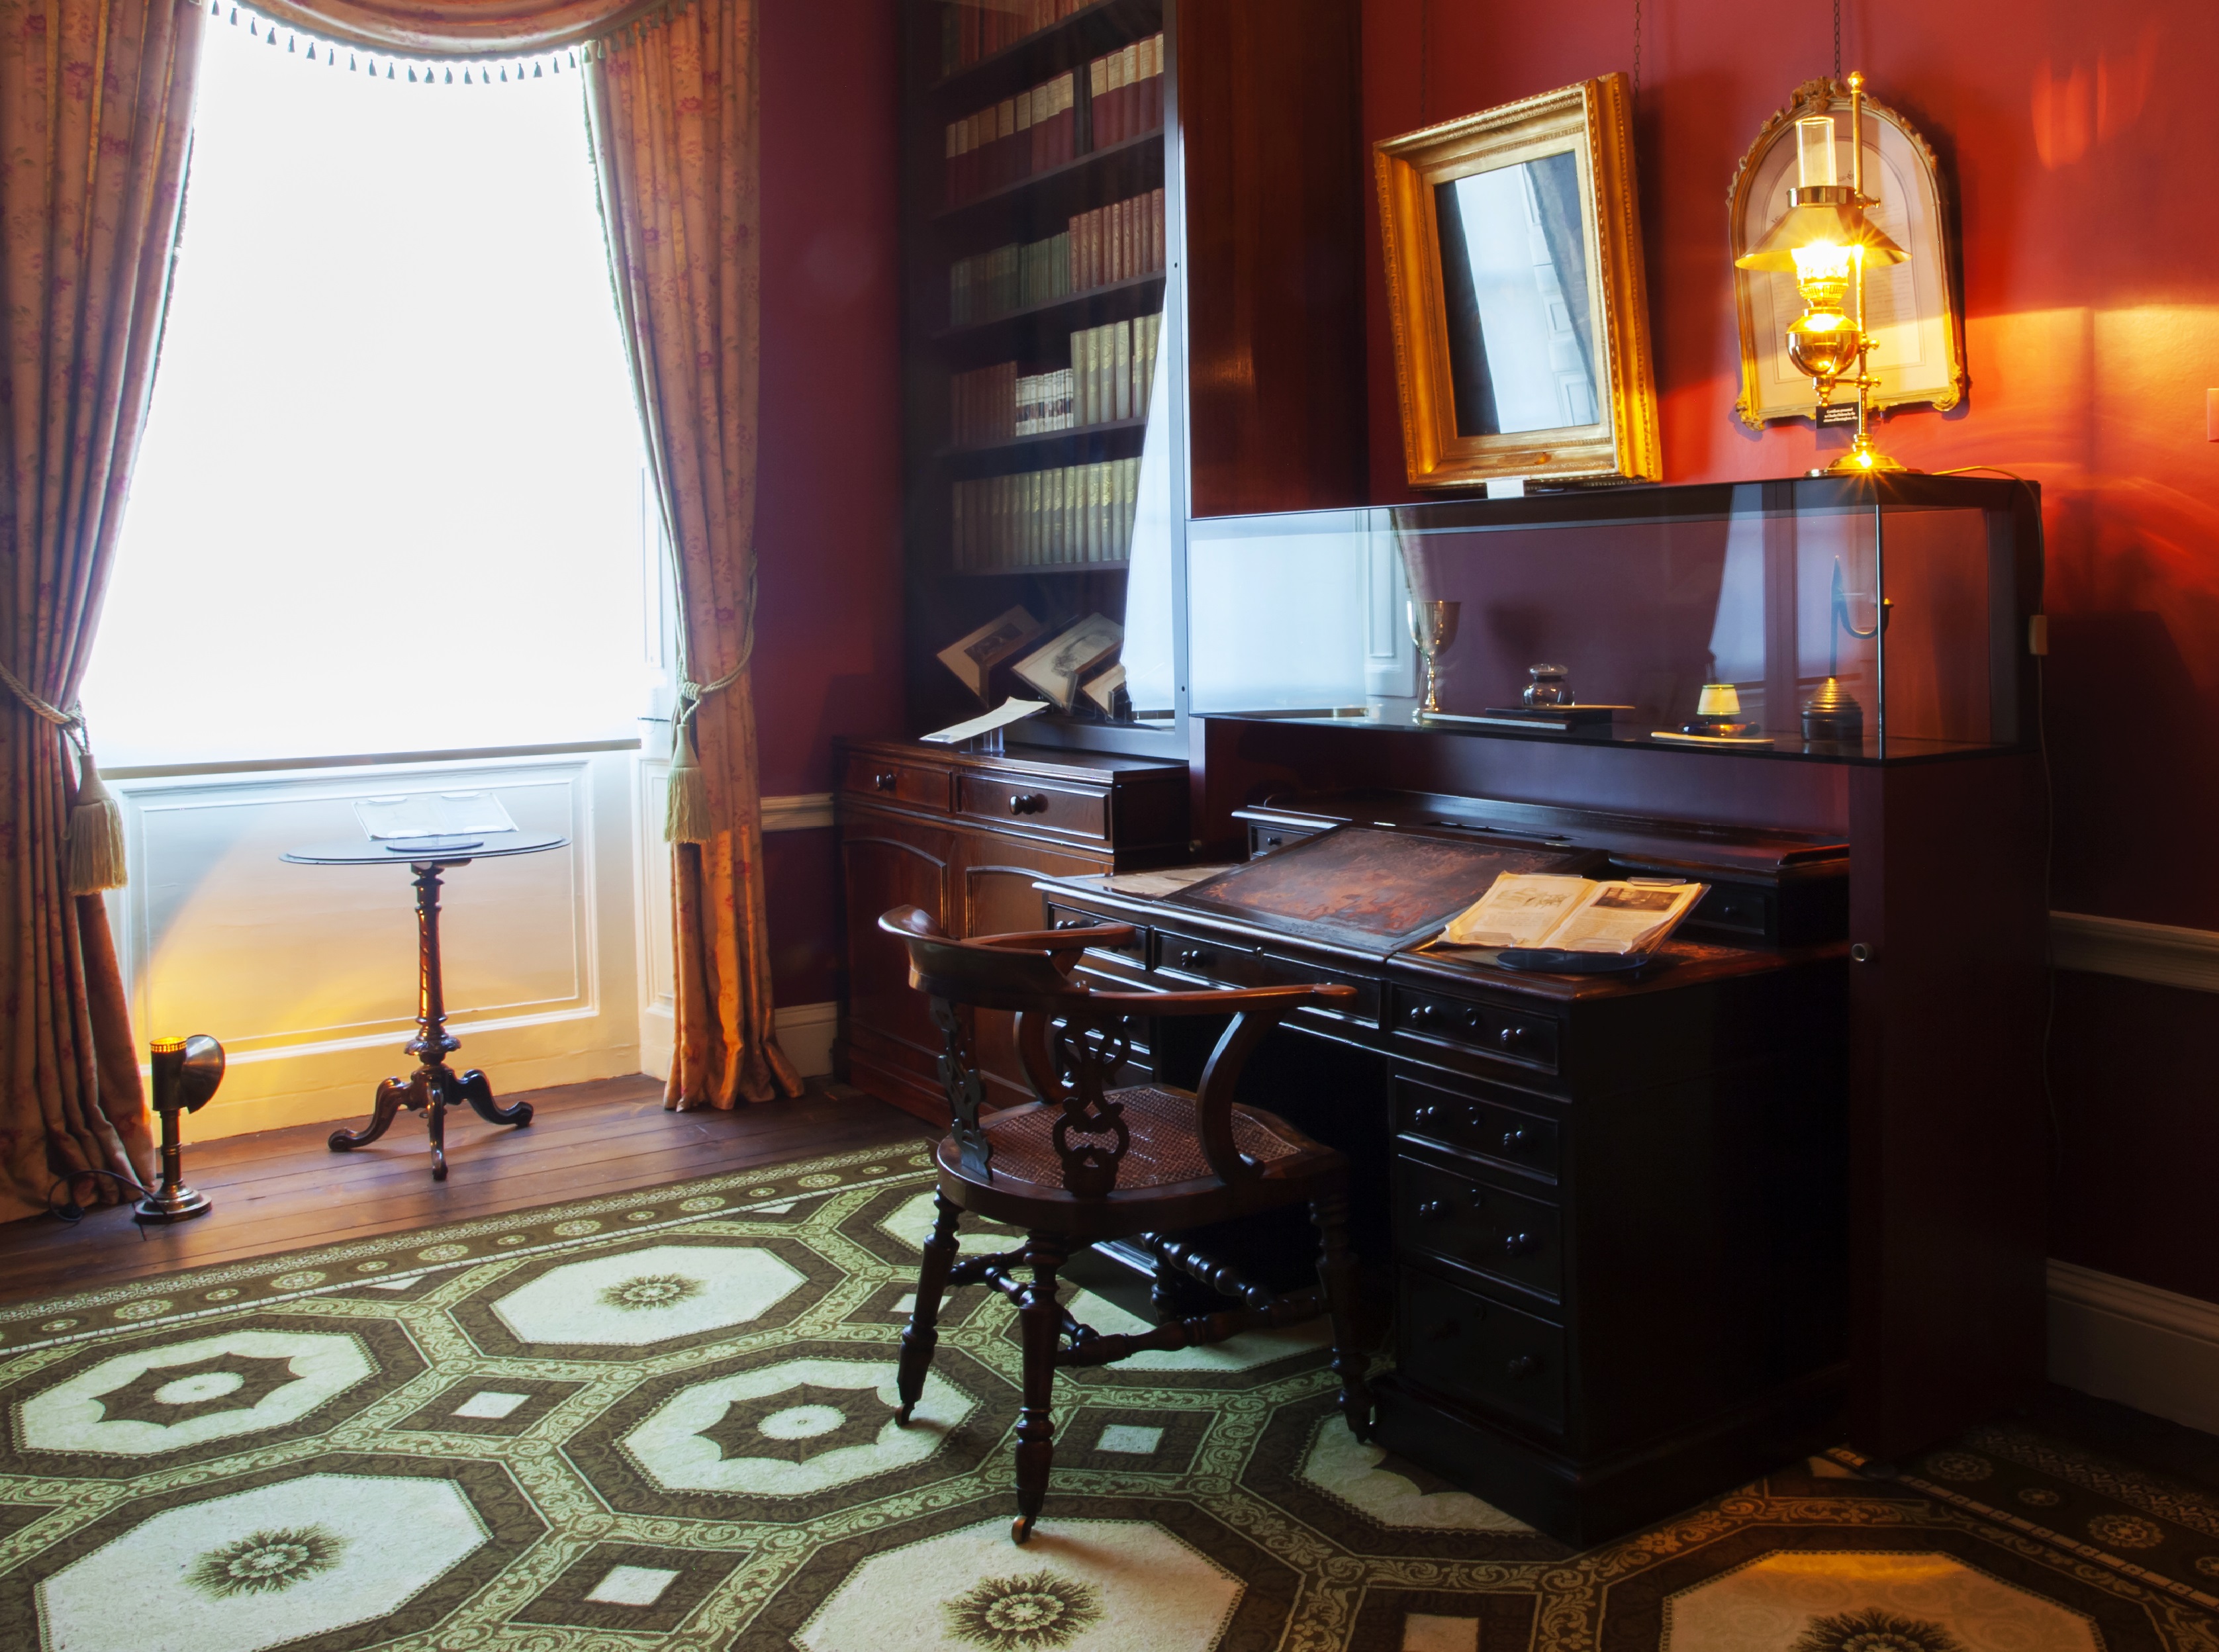 Charles Dickens' desk and chair at the Charles Dickens Museum in London. Image courtesy of the Charles Dickens Museum